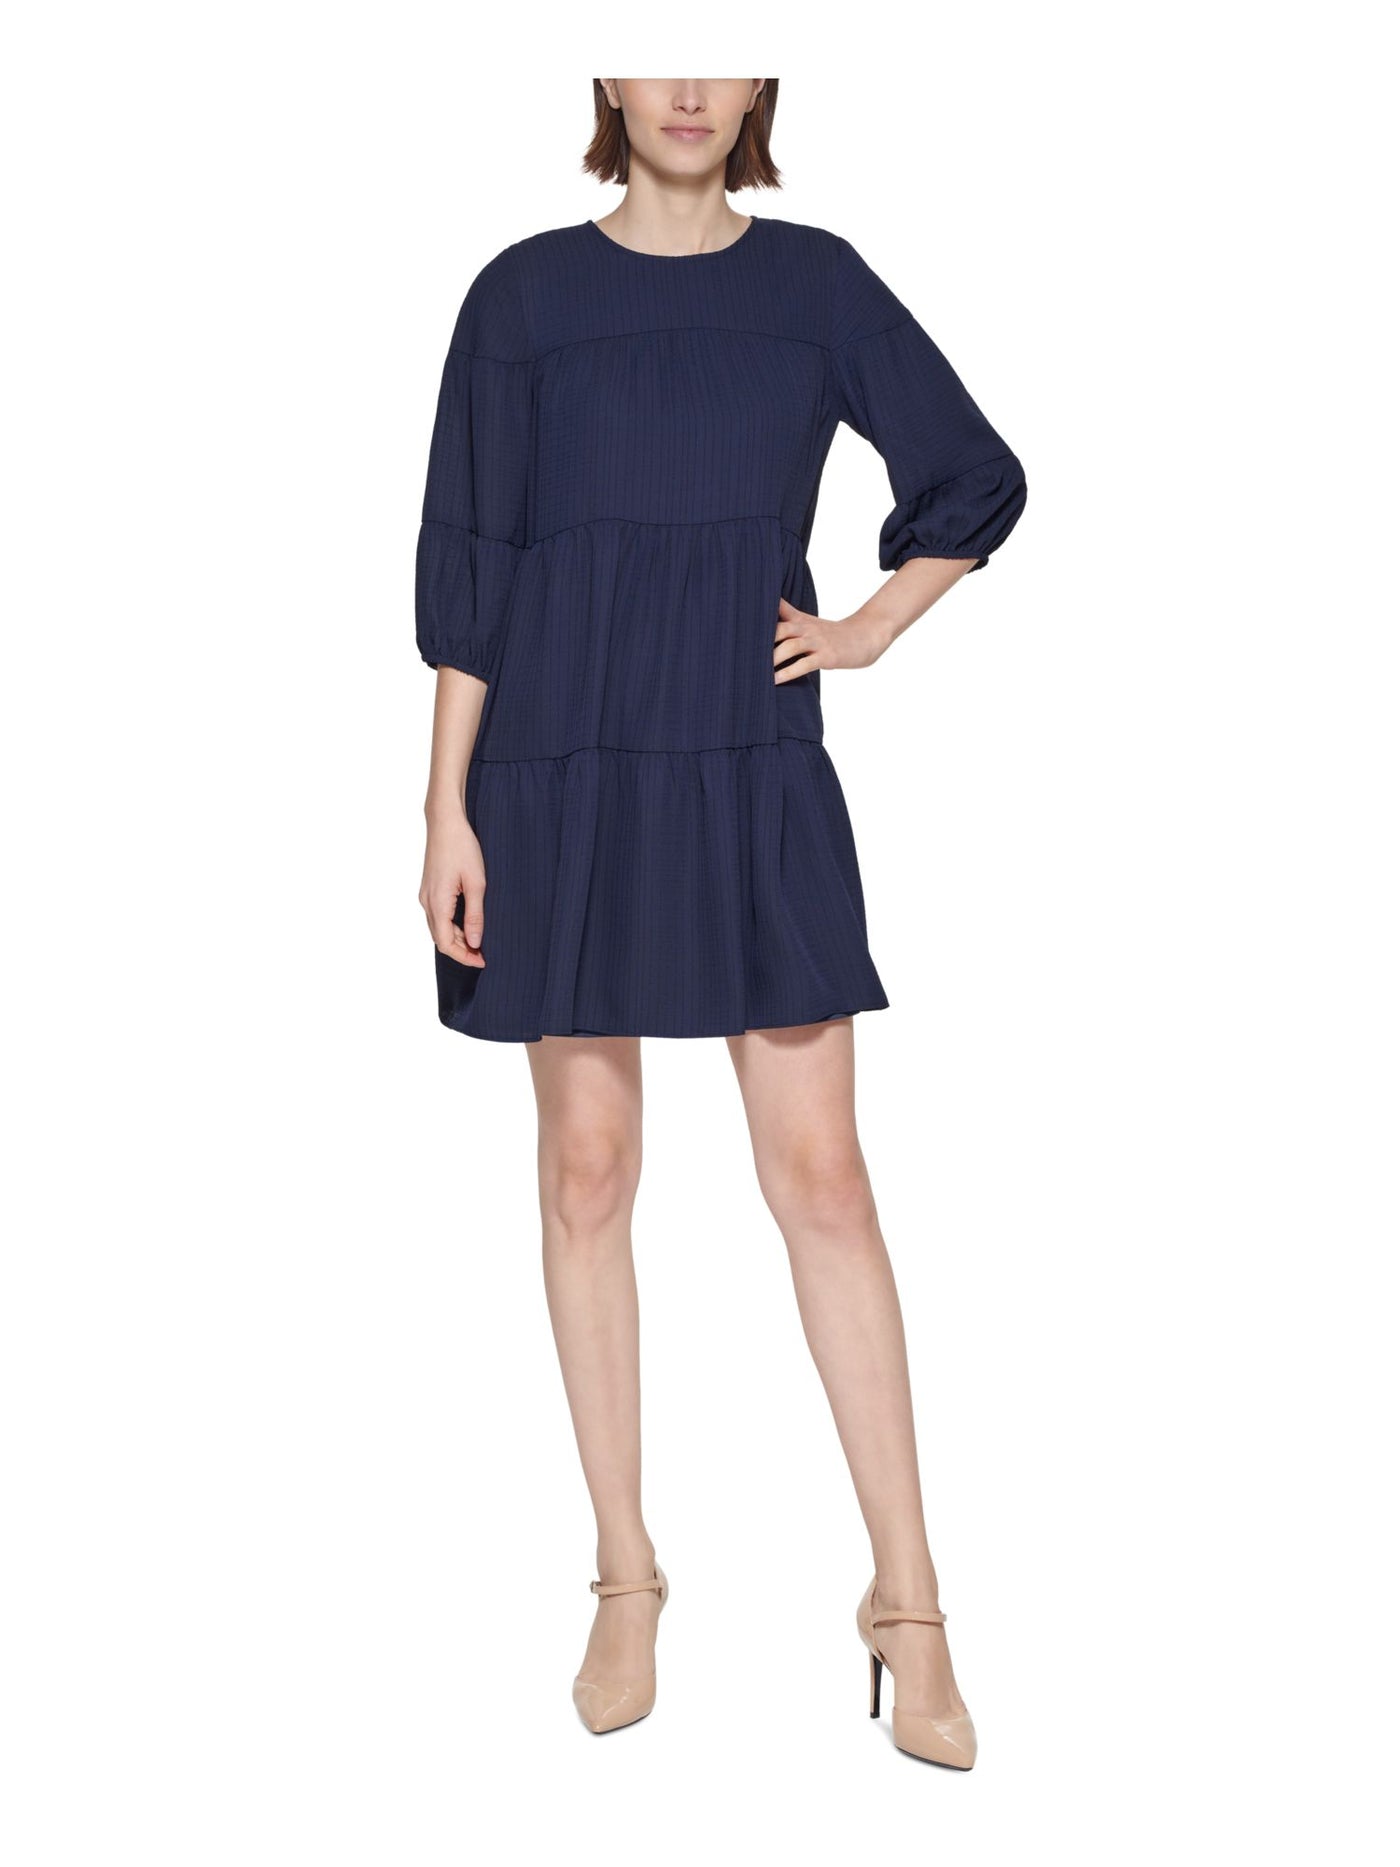 CALVIN KLEIN Womens Navy Textured Keyhole Back Tiered Lined 3/4 Sleeve Round Neck Short Shift Dress Petites 10P